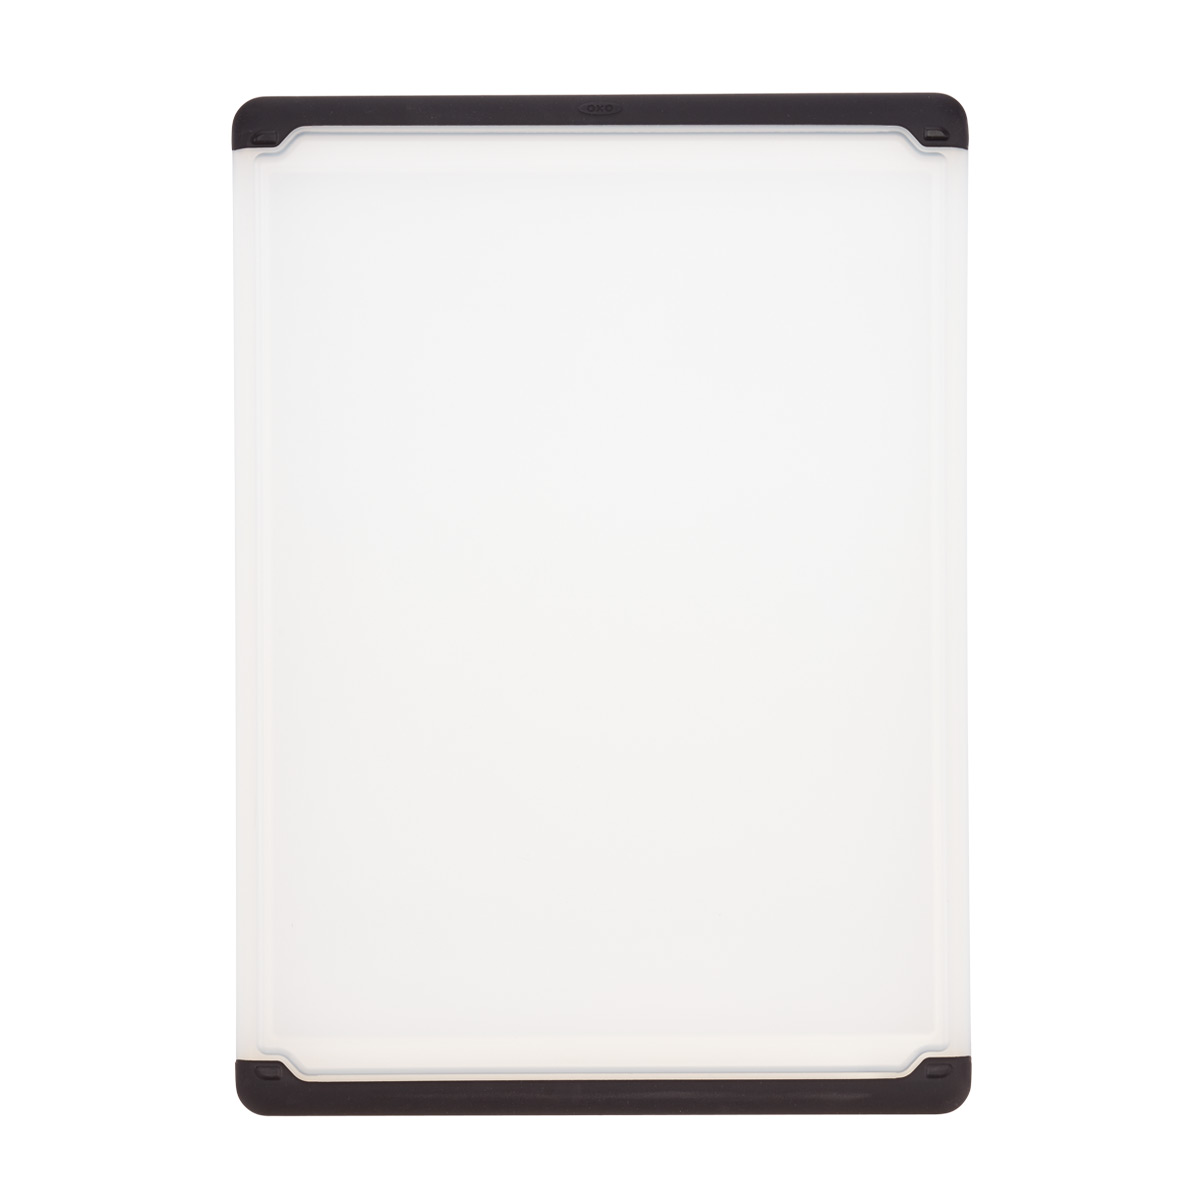 https://www.containerstore.com/catalogimages/330042/10073554-oxo-utility-cutting-board.jpg